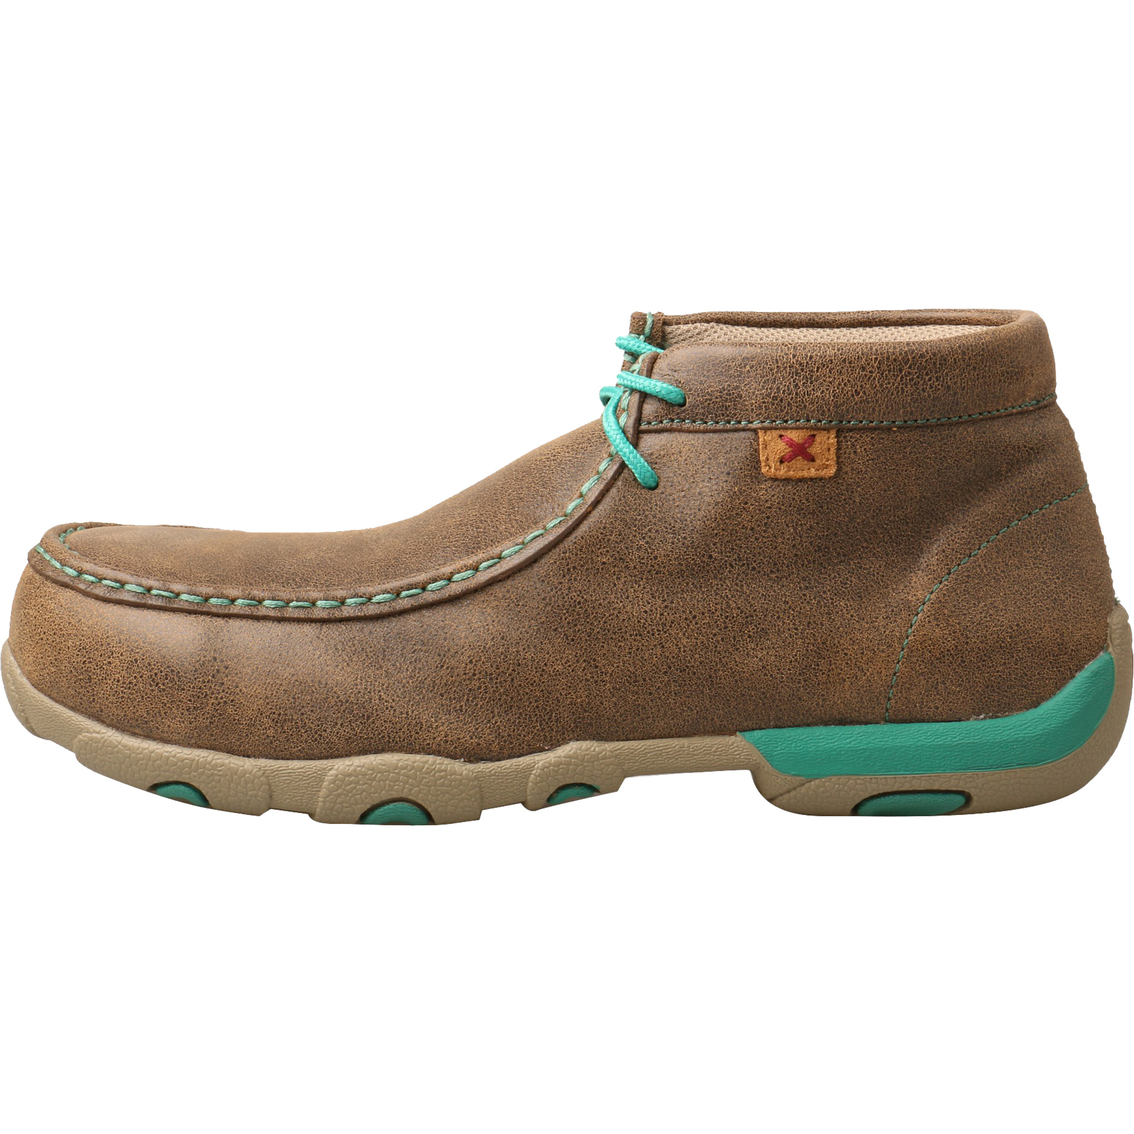 Twisted X Women's Work Alloy Toe Chukka Driving Moc Shoes - Image 3 of 6